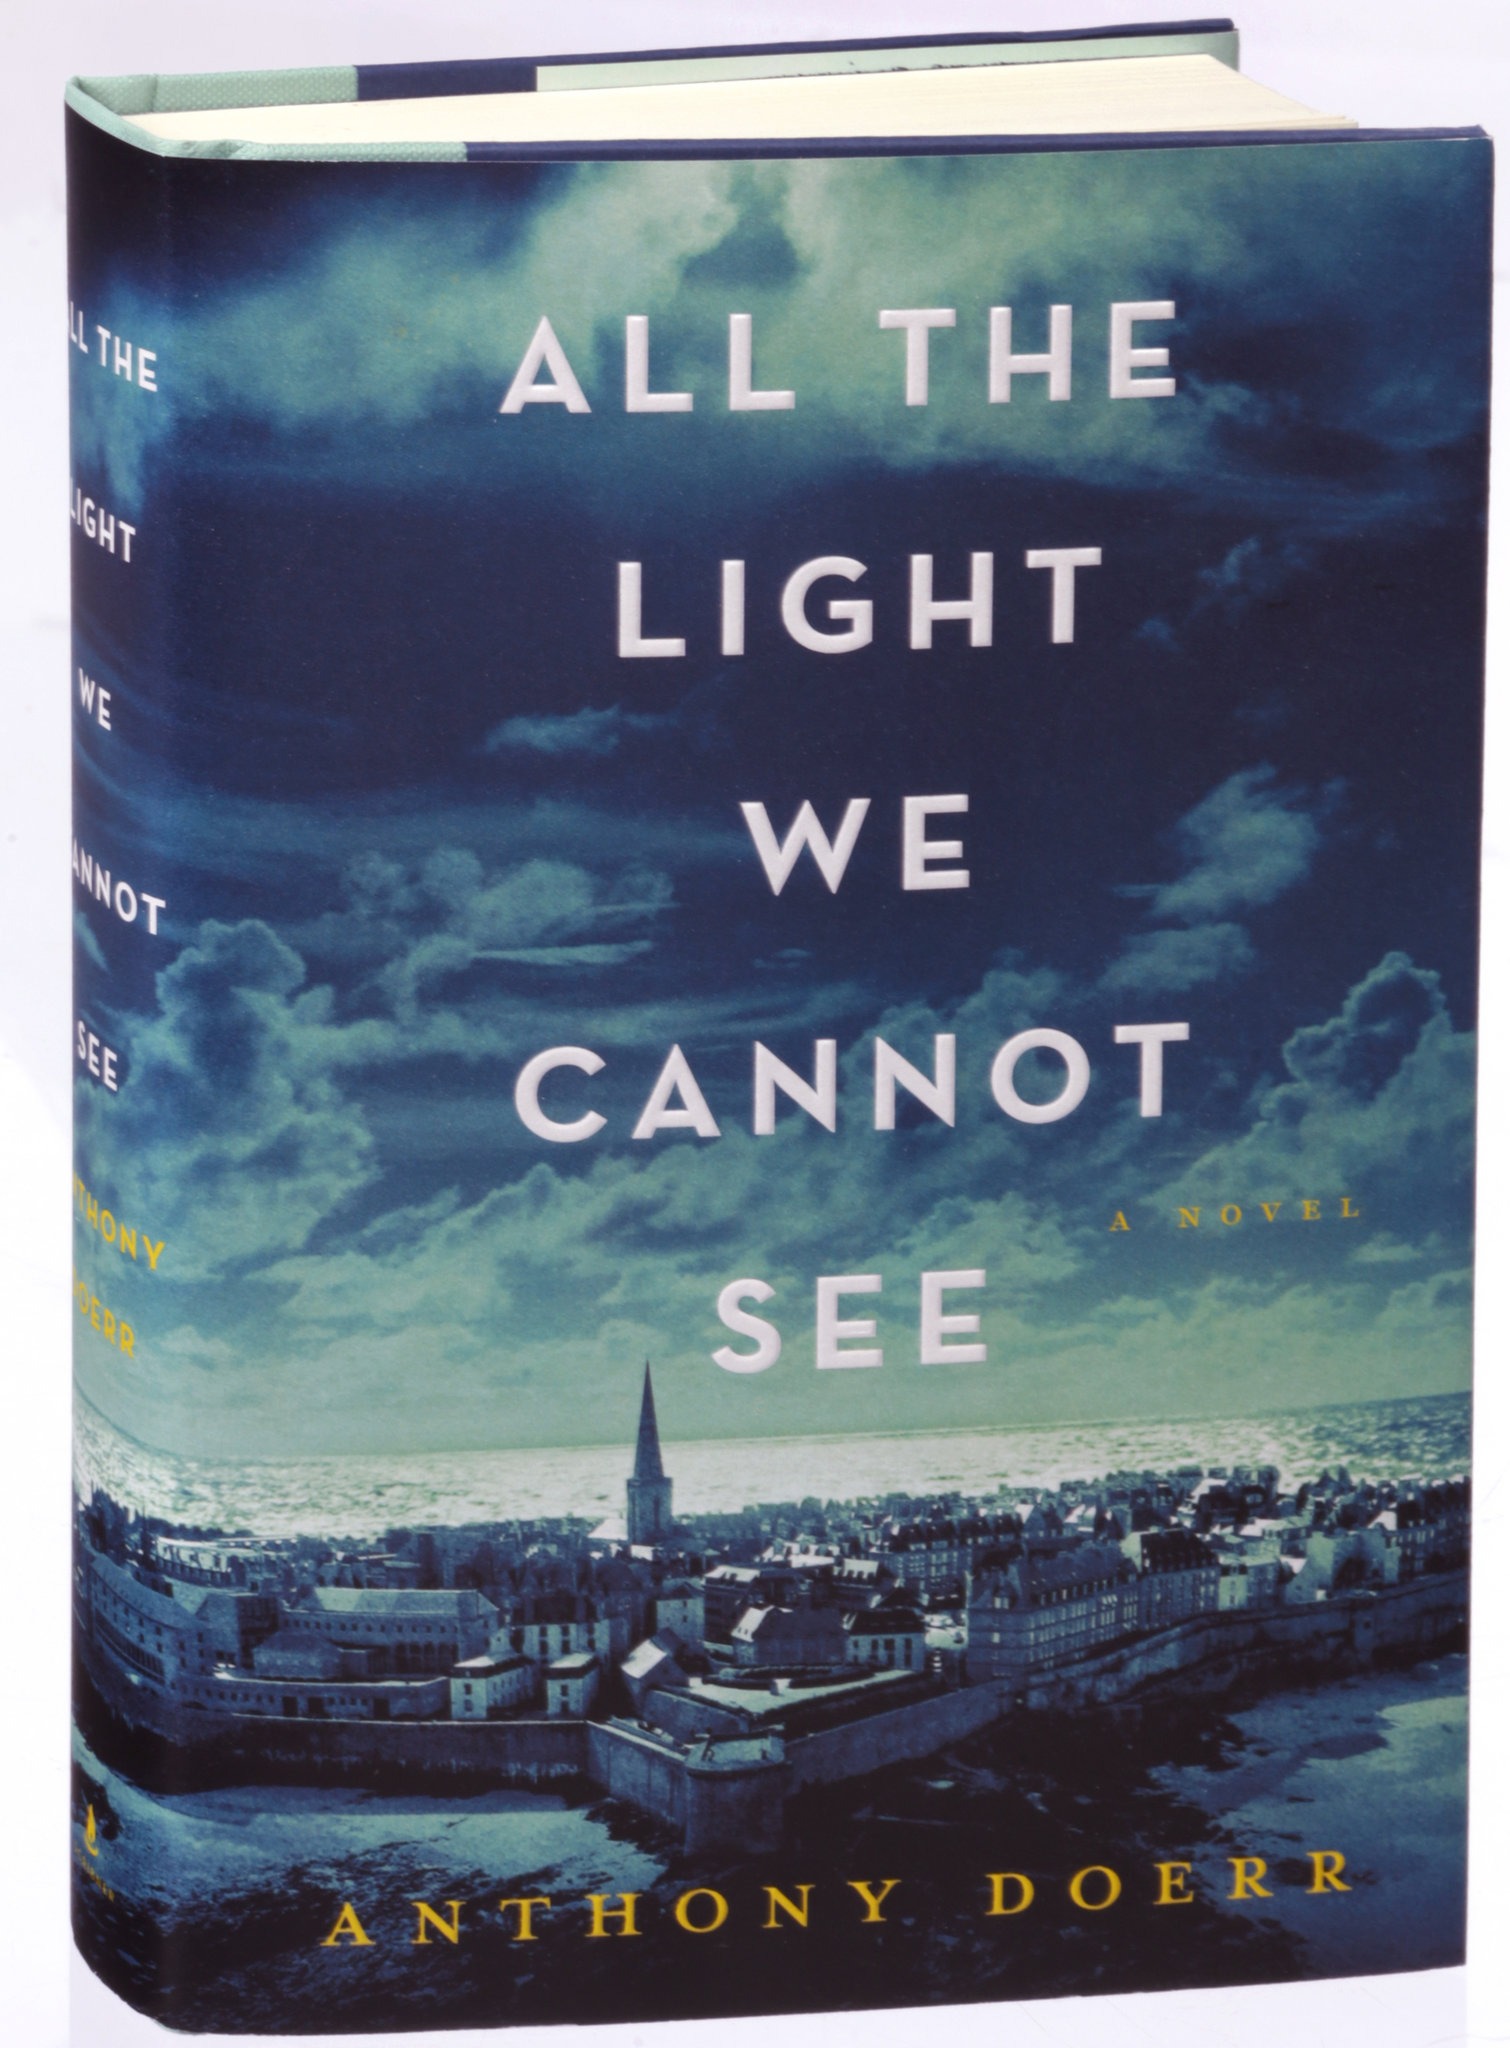 All the Light We Cannot See by Anthony Doerr